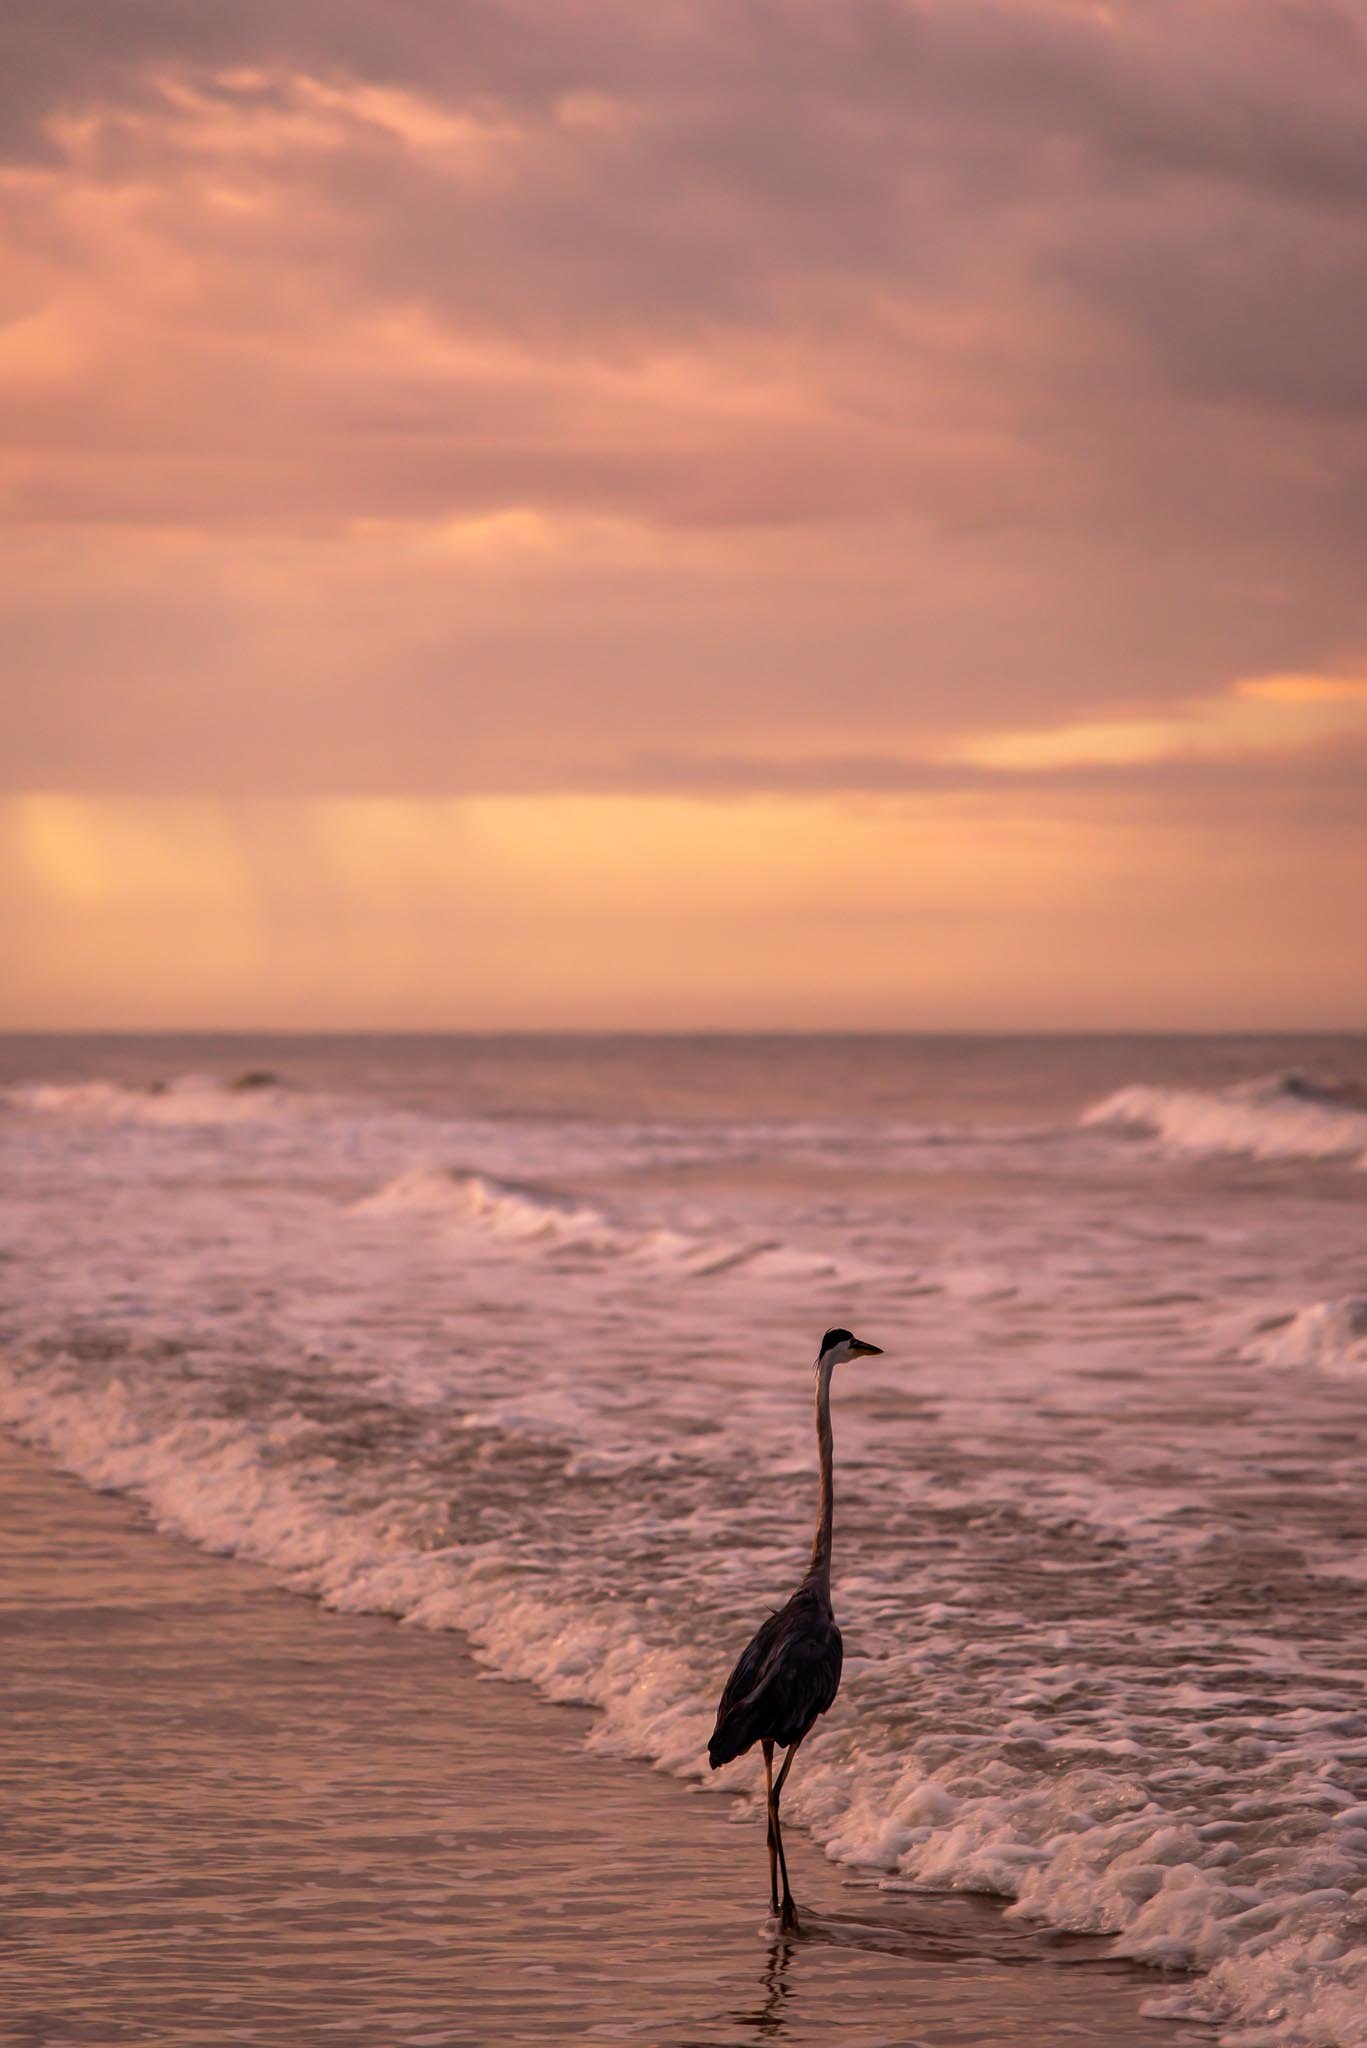 Great blue heron wading in the beach surf at sunset.